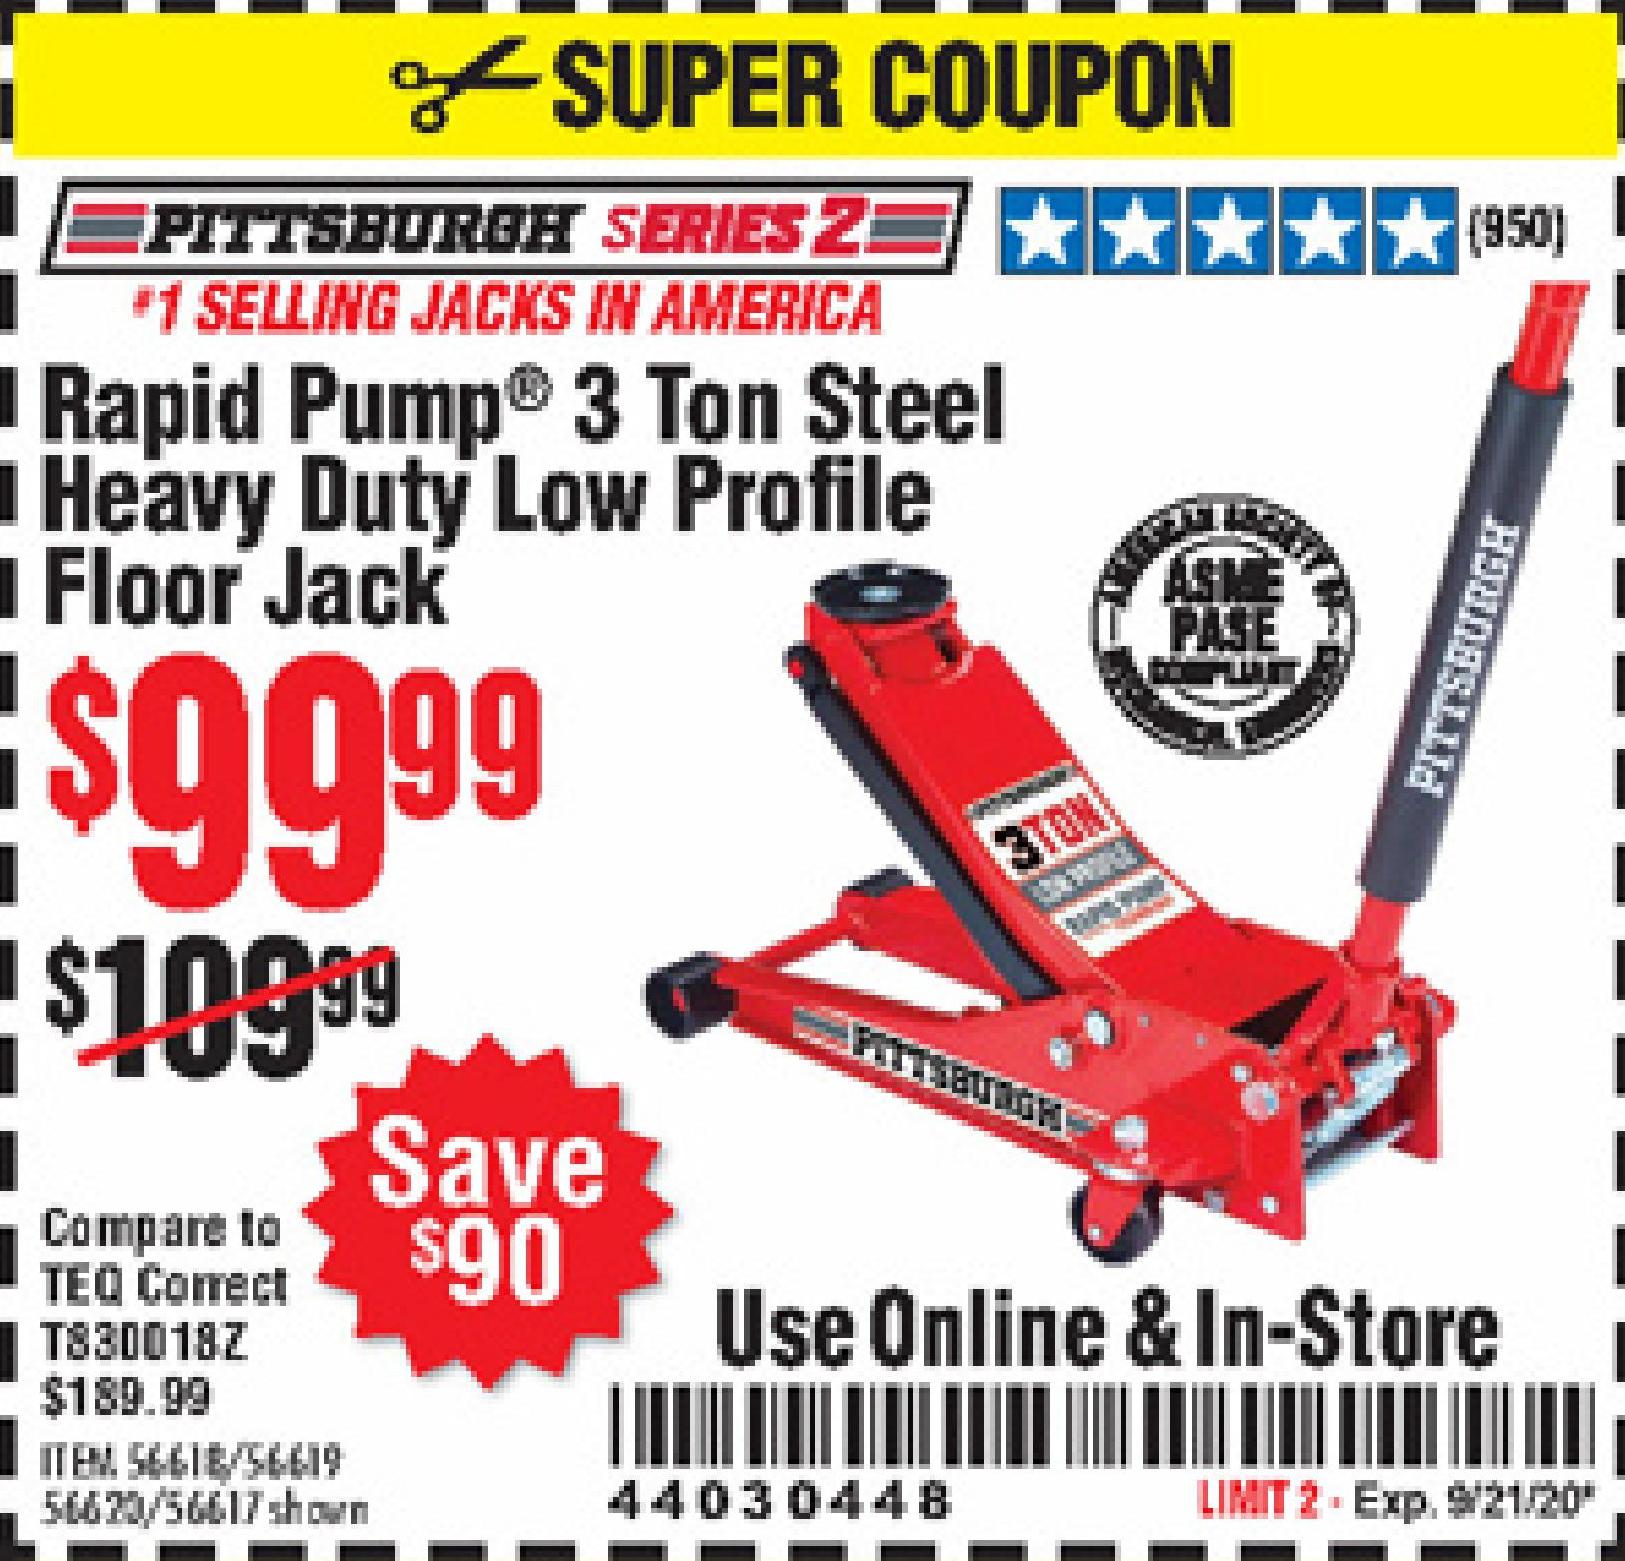 Harbor Freight Tools Coupon Database - Free coupons, 25 percent off coupons,  toolbox coupons - RAPID PUMP 3 TON STEEL HEAVY DUTY LOW PROFILE FLOOR JACK